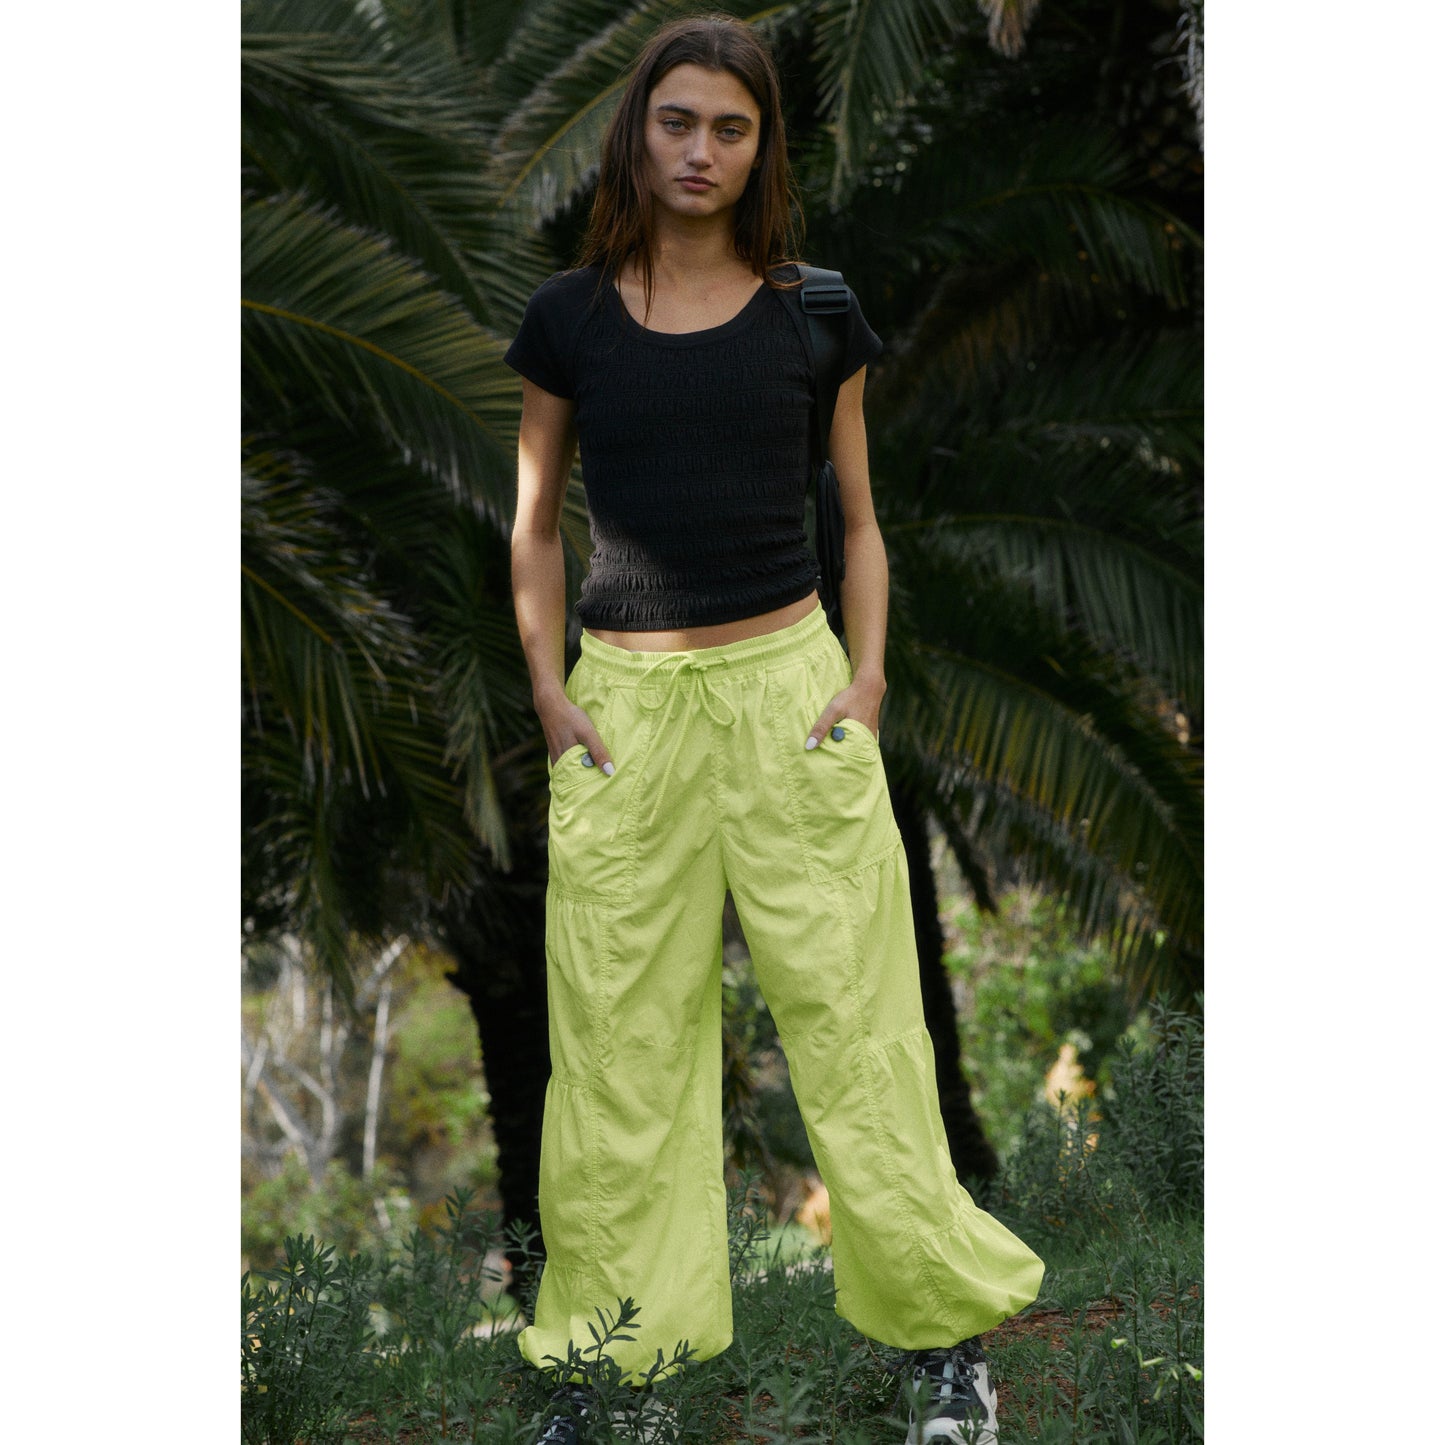 A woman with shoulder-length brown hair wearing a black top and Free People Movement's Set Me Free Pant in Lime stands in a garden, gazing directly at the camera.